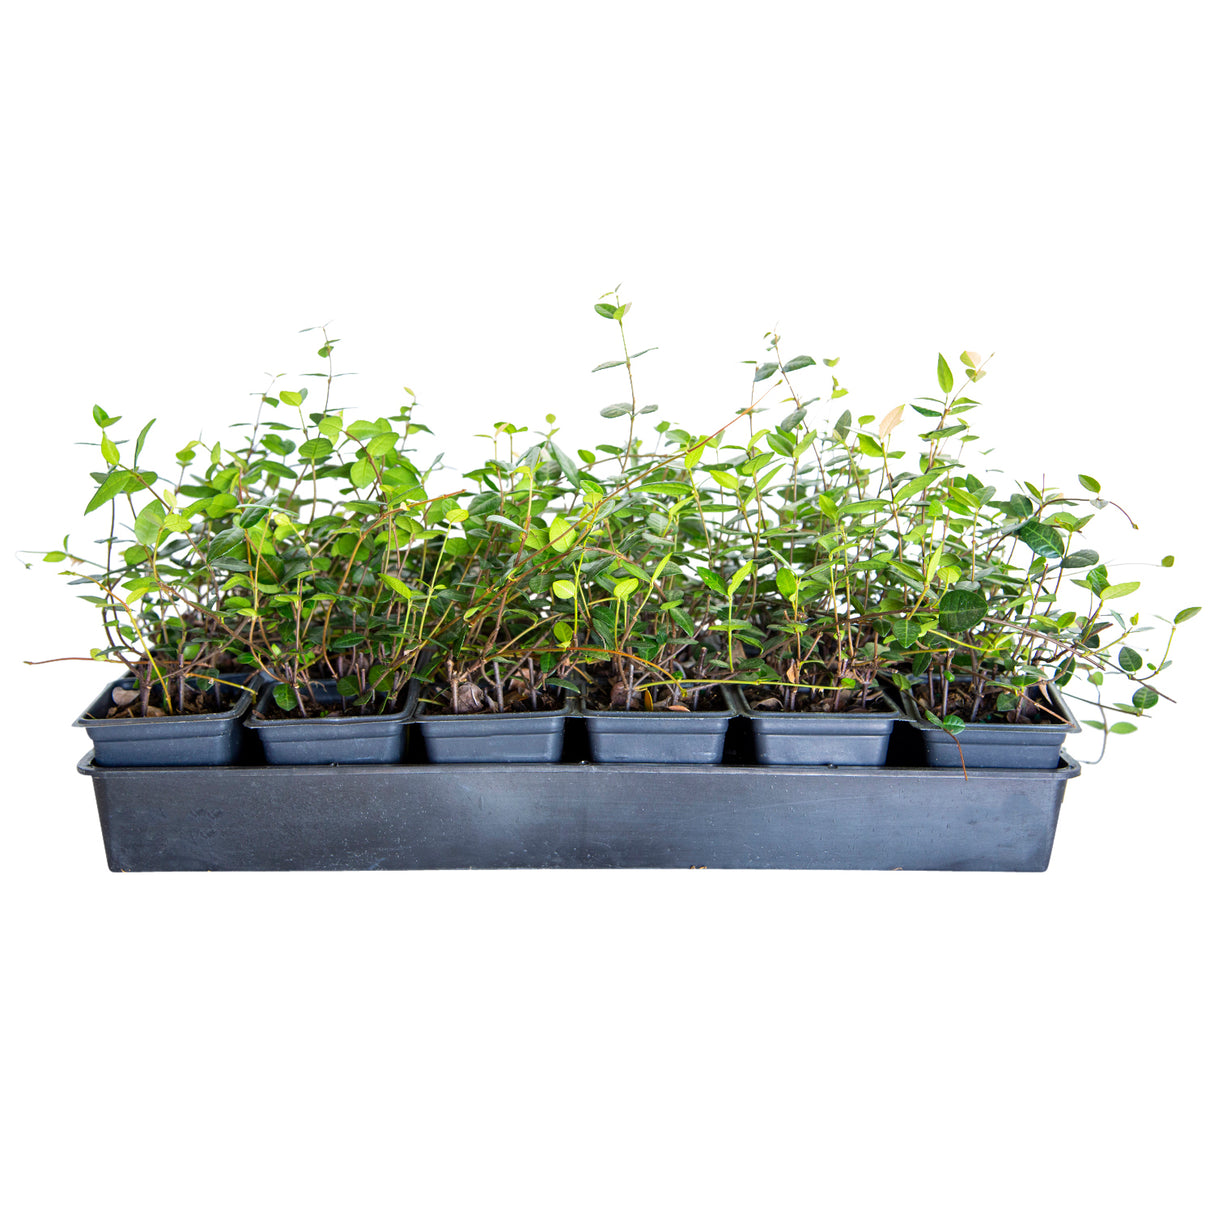 18 pack of 4 inch cups of Asiatic Jasmine groundcover vine for sale